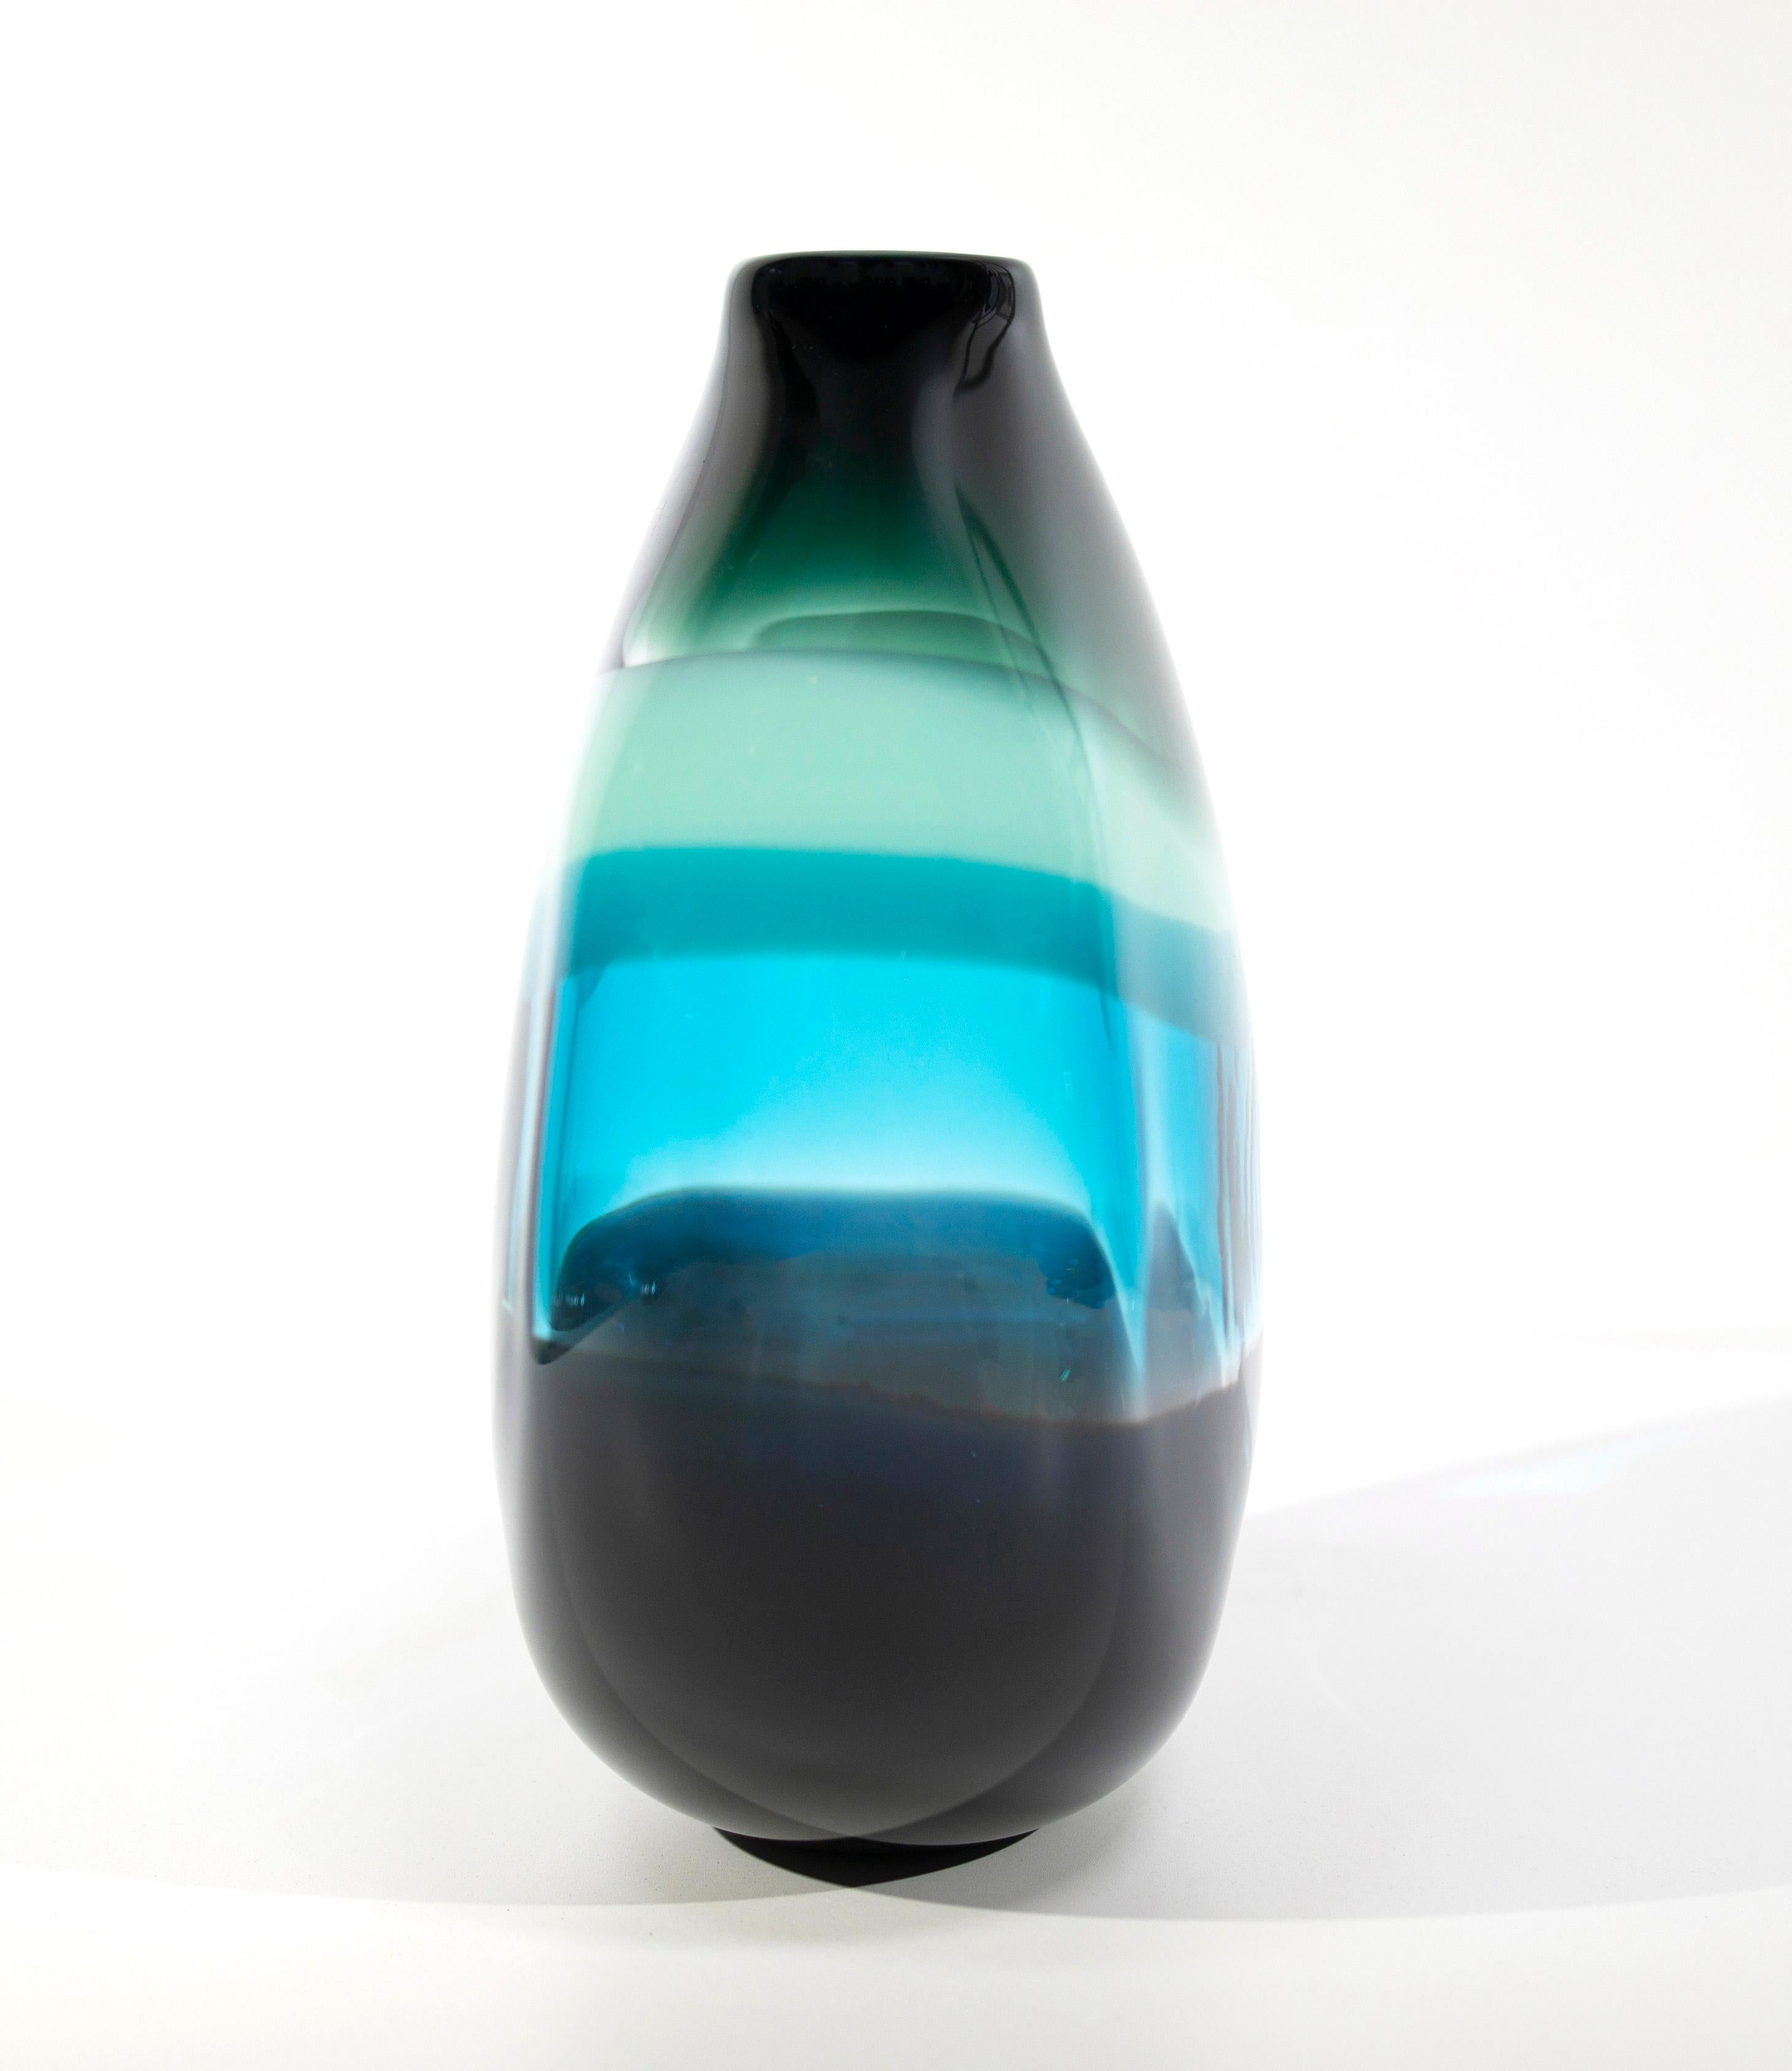 Aqua banded vase. Inspired by the rich hues and topography of Southern California, alternating layers of opaque and transparent colors are applied to clear glass. New colors are formed by overlaps, adding depth to the pieces. Simple shapes